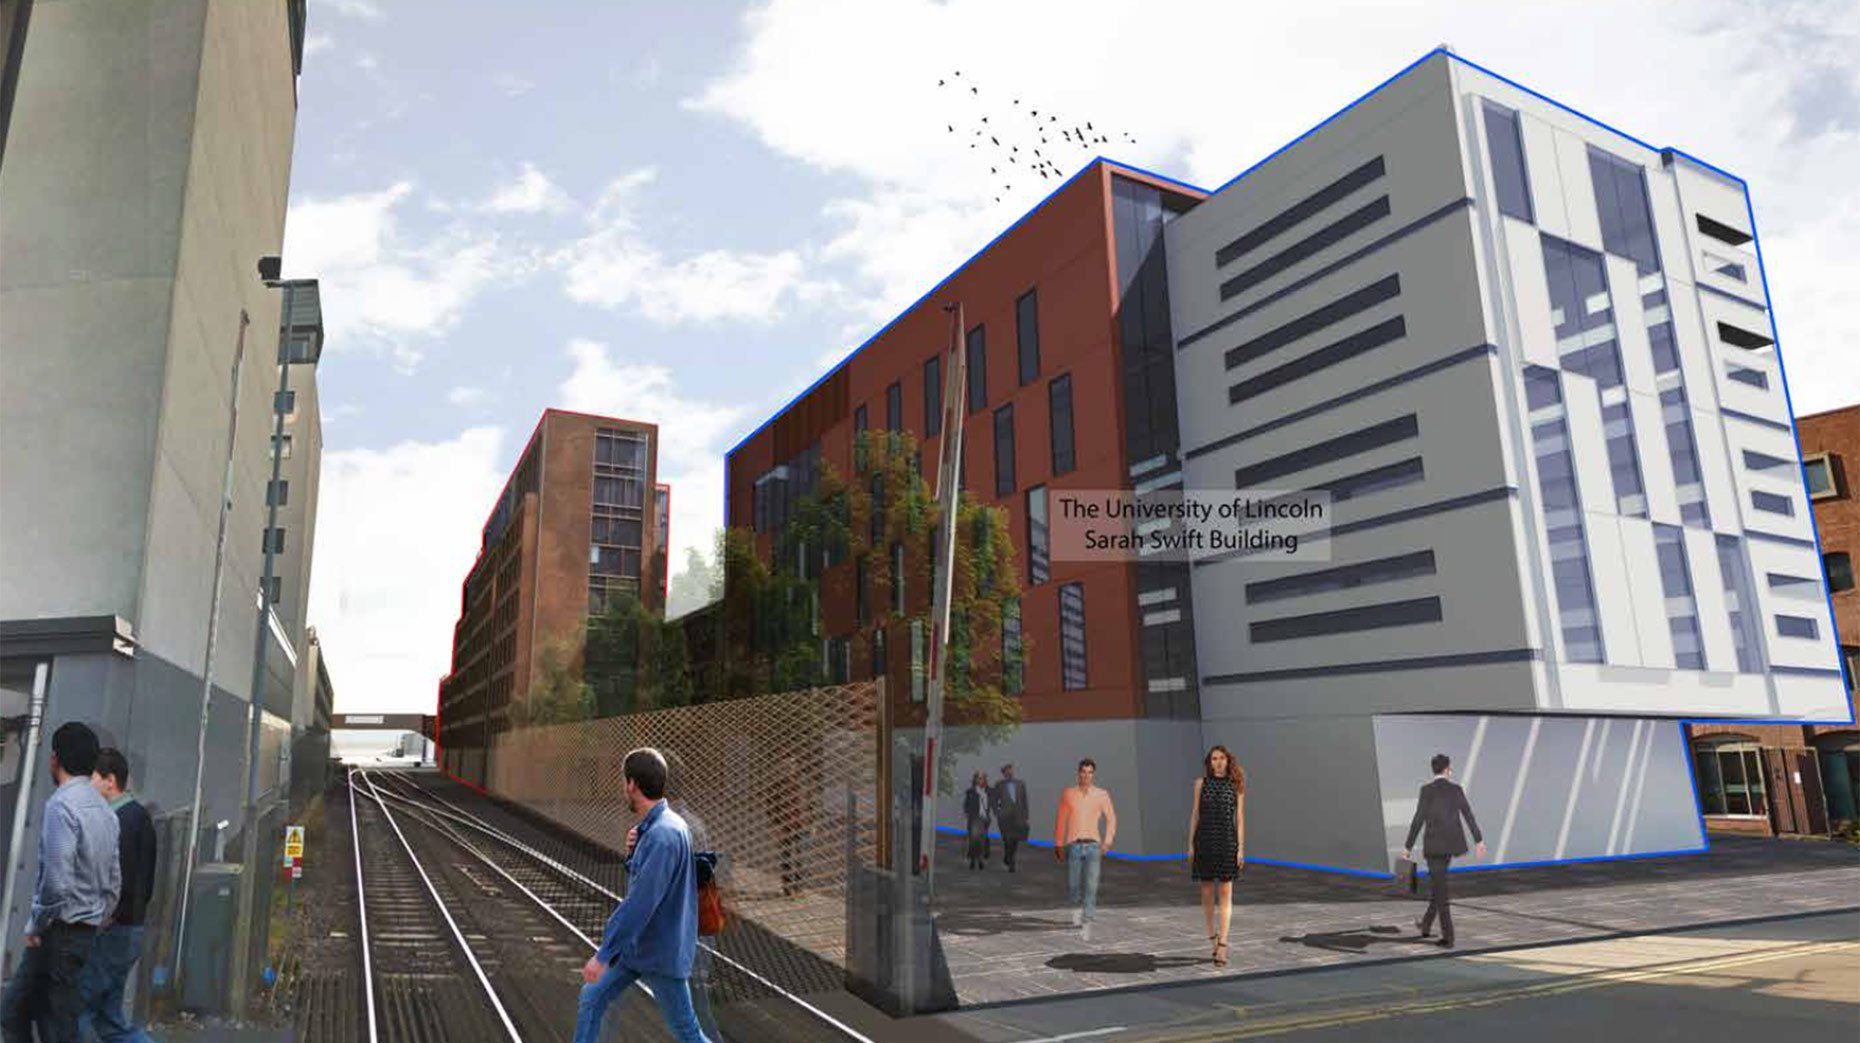 The buildings would sit behind the university's Sarah Swift Building, which is currently under construction. Artist impressions: Stem Architects